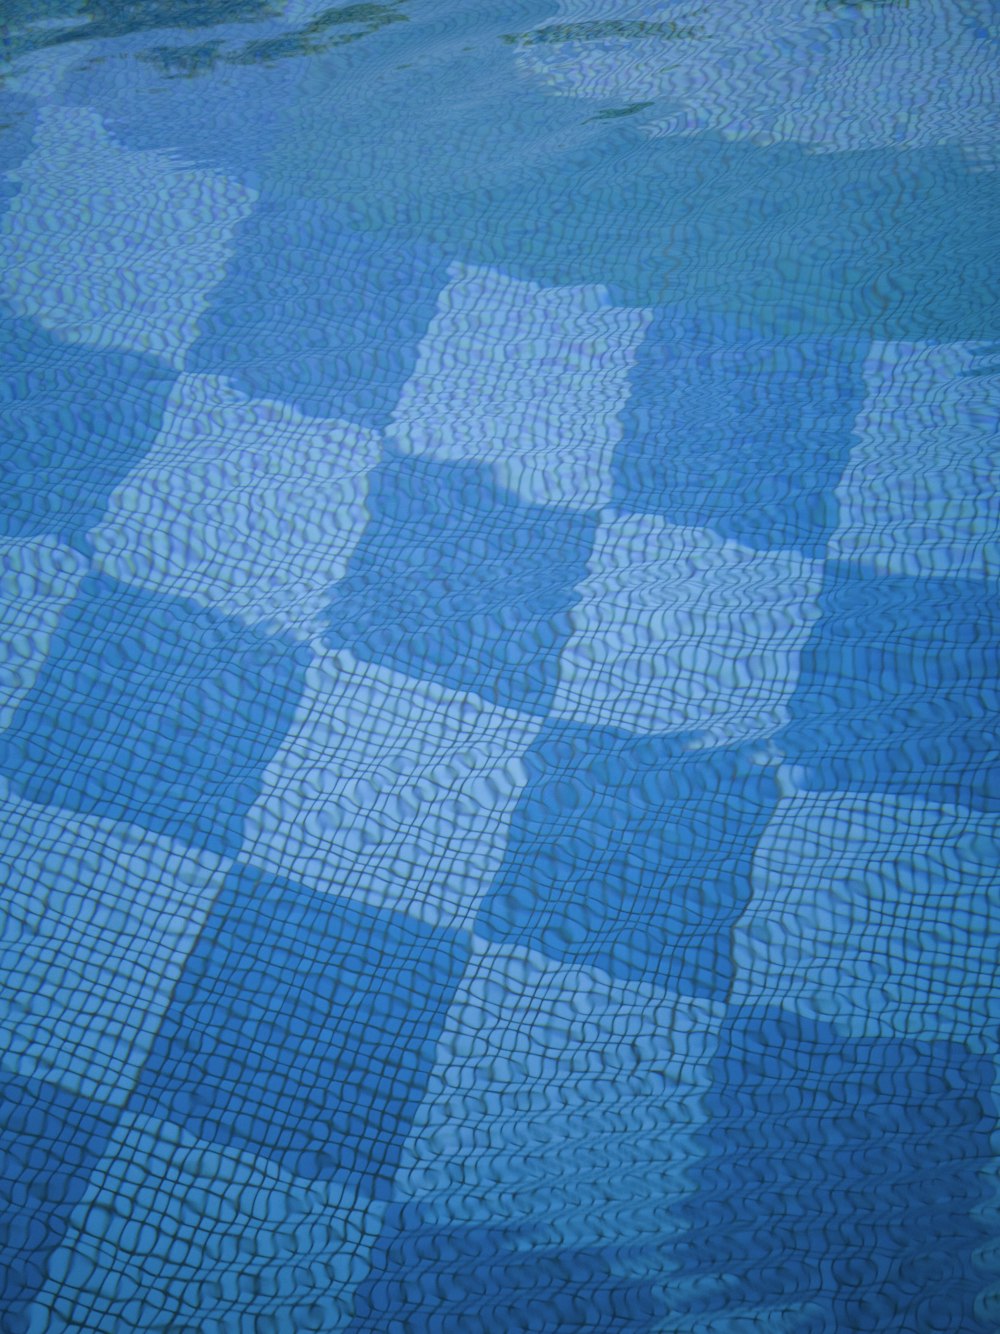 a blue and white checkered swimming pool